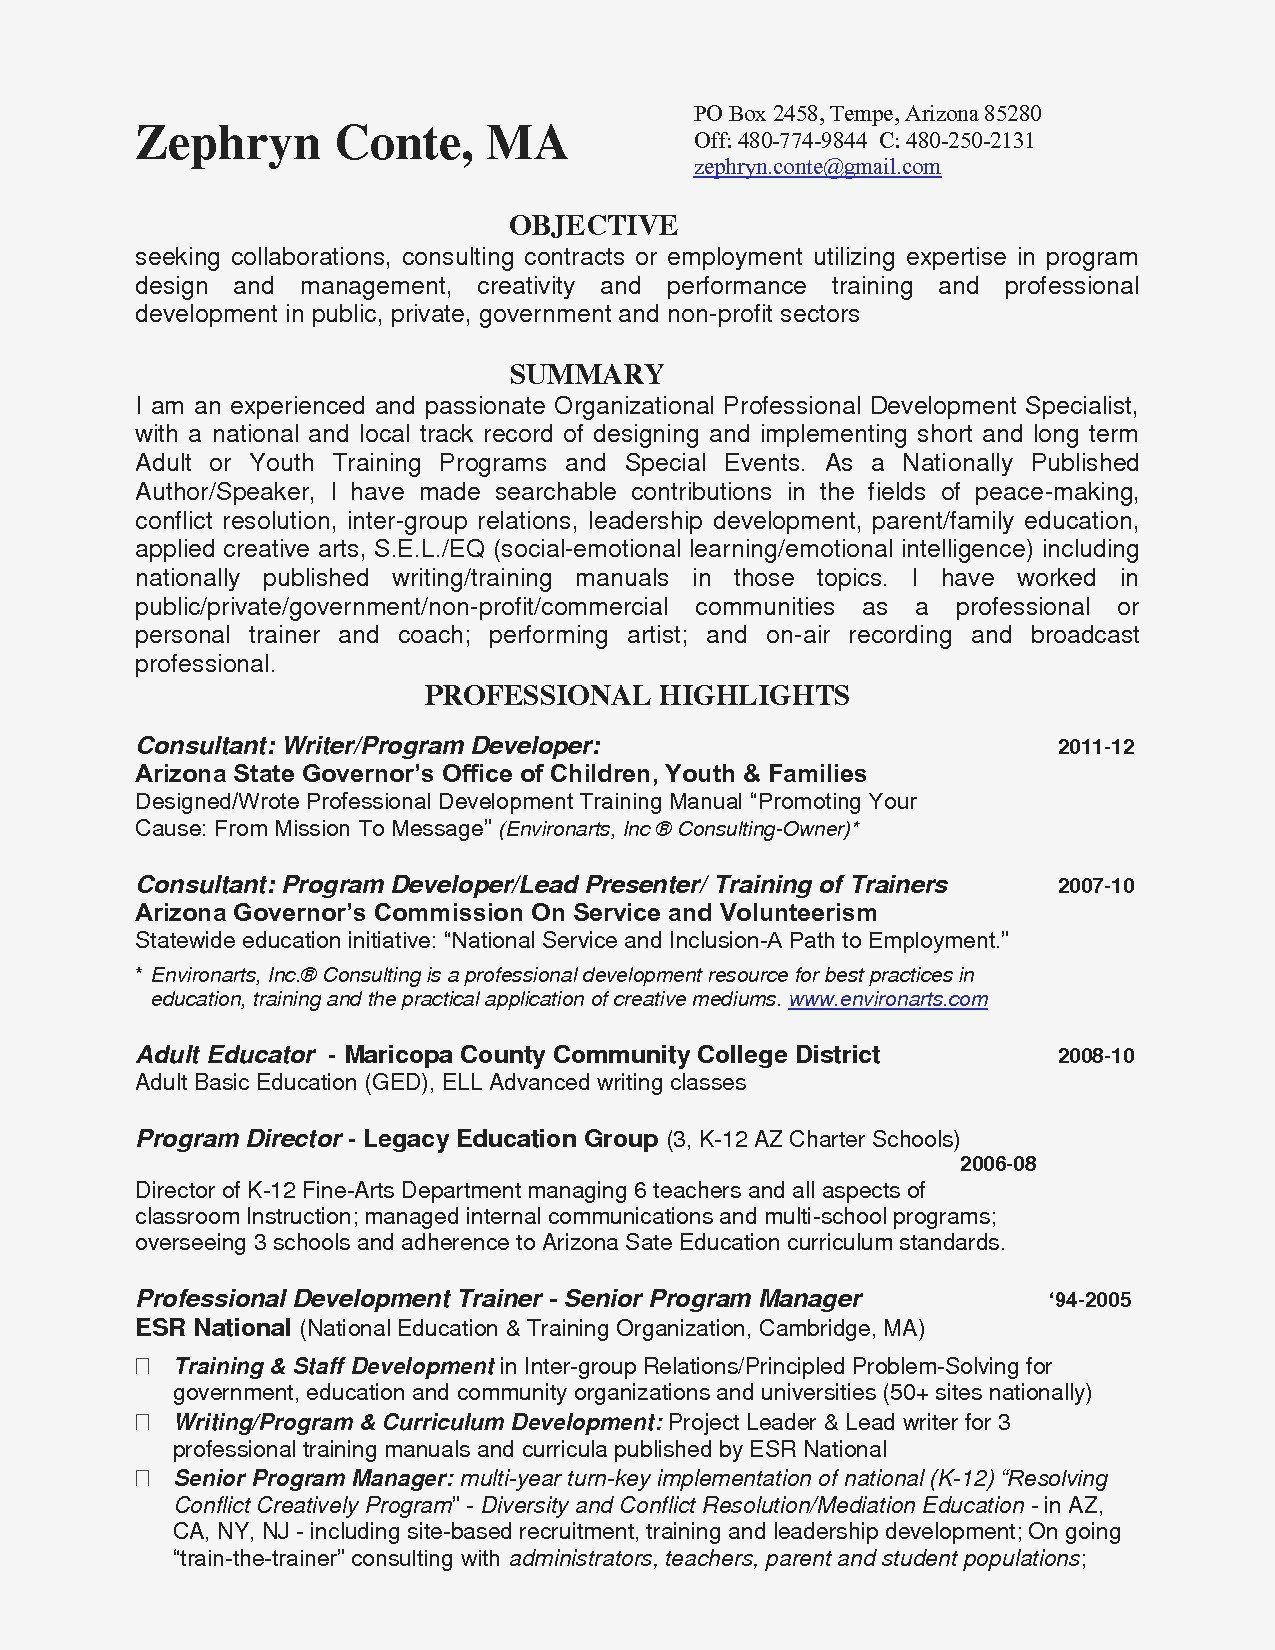 Sample Resume for Community College Teaching Position Sample Resume for Community College Teaching Position Beautiful …